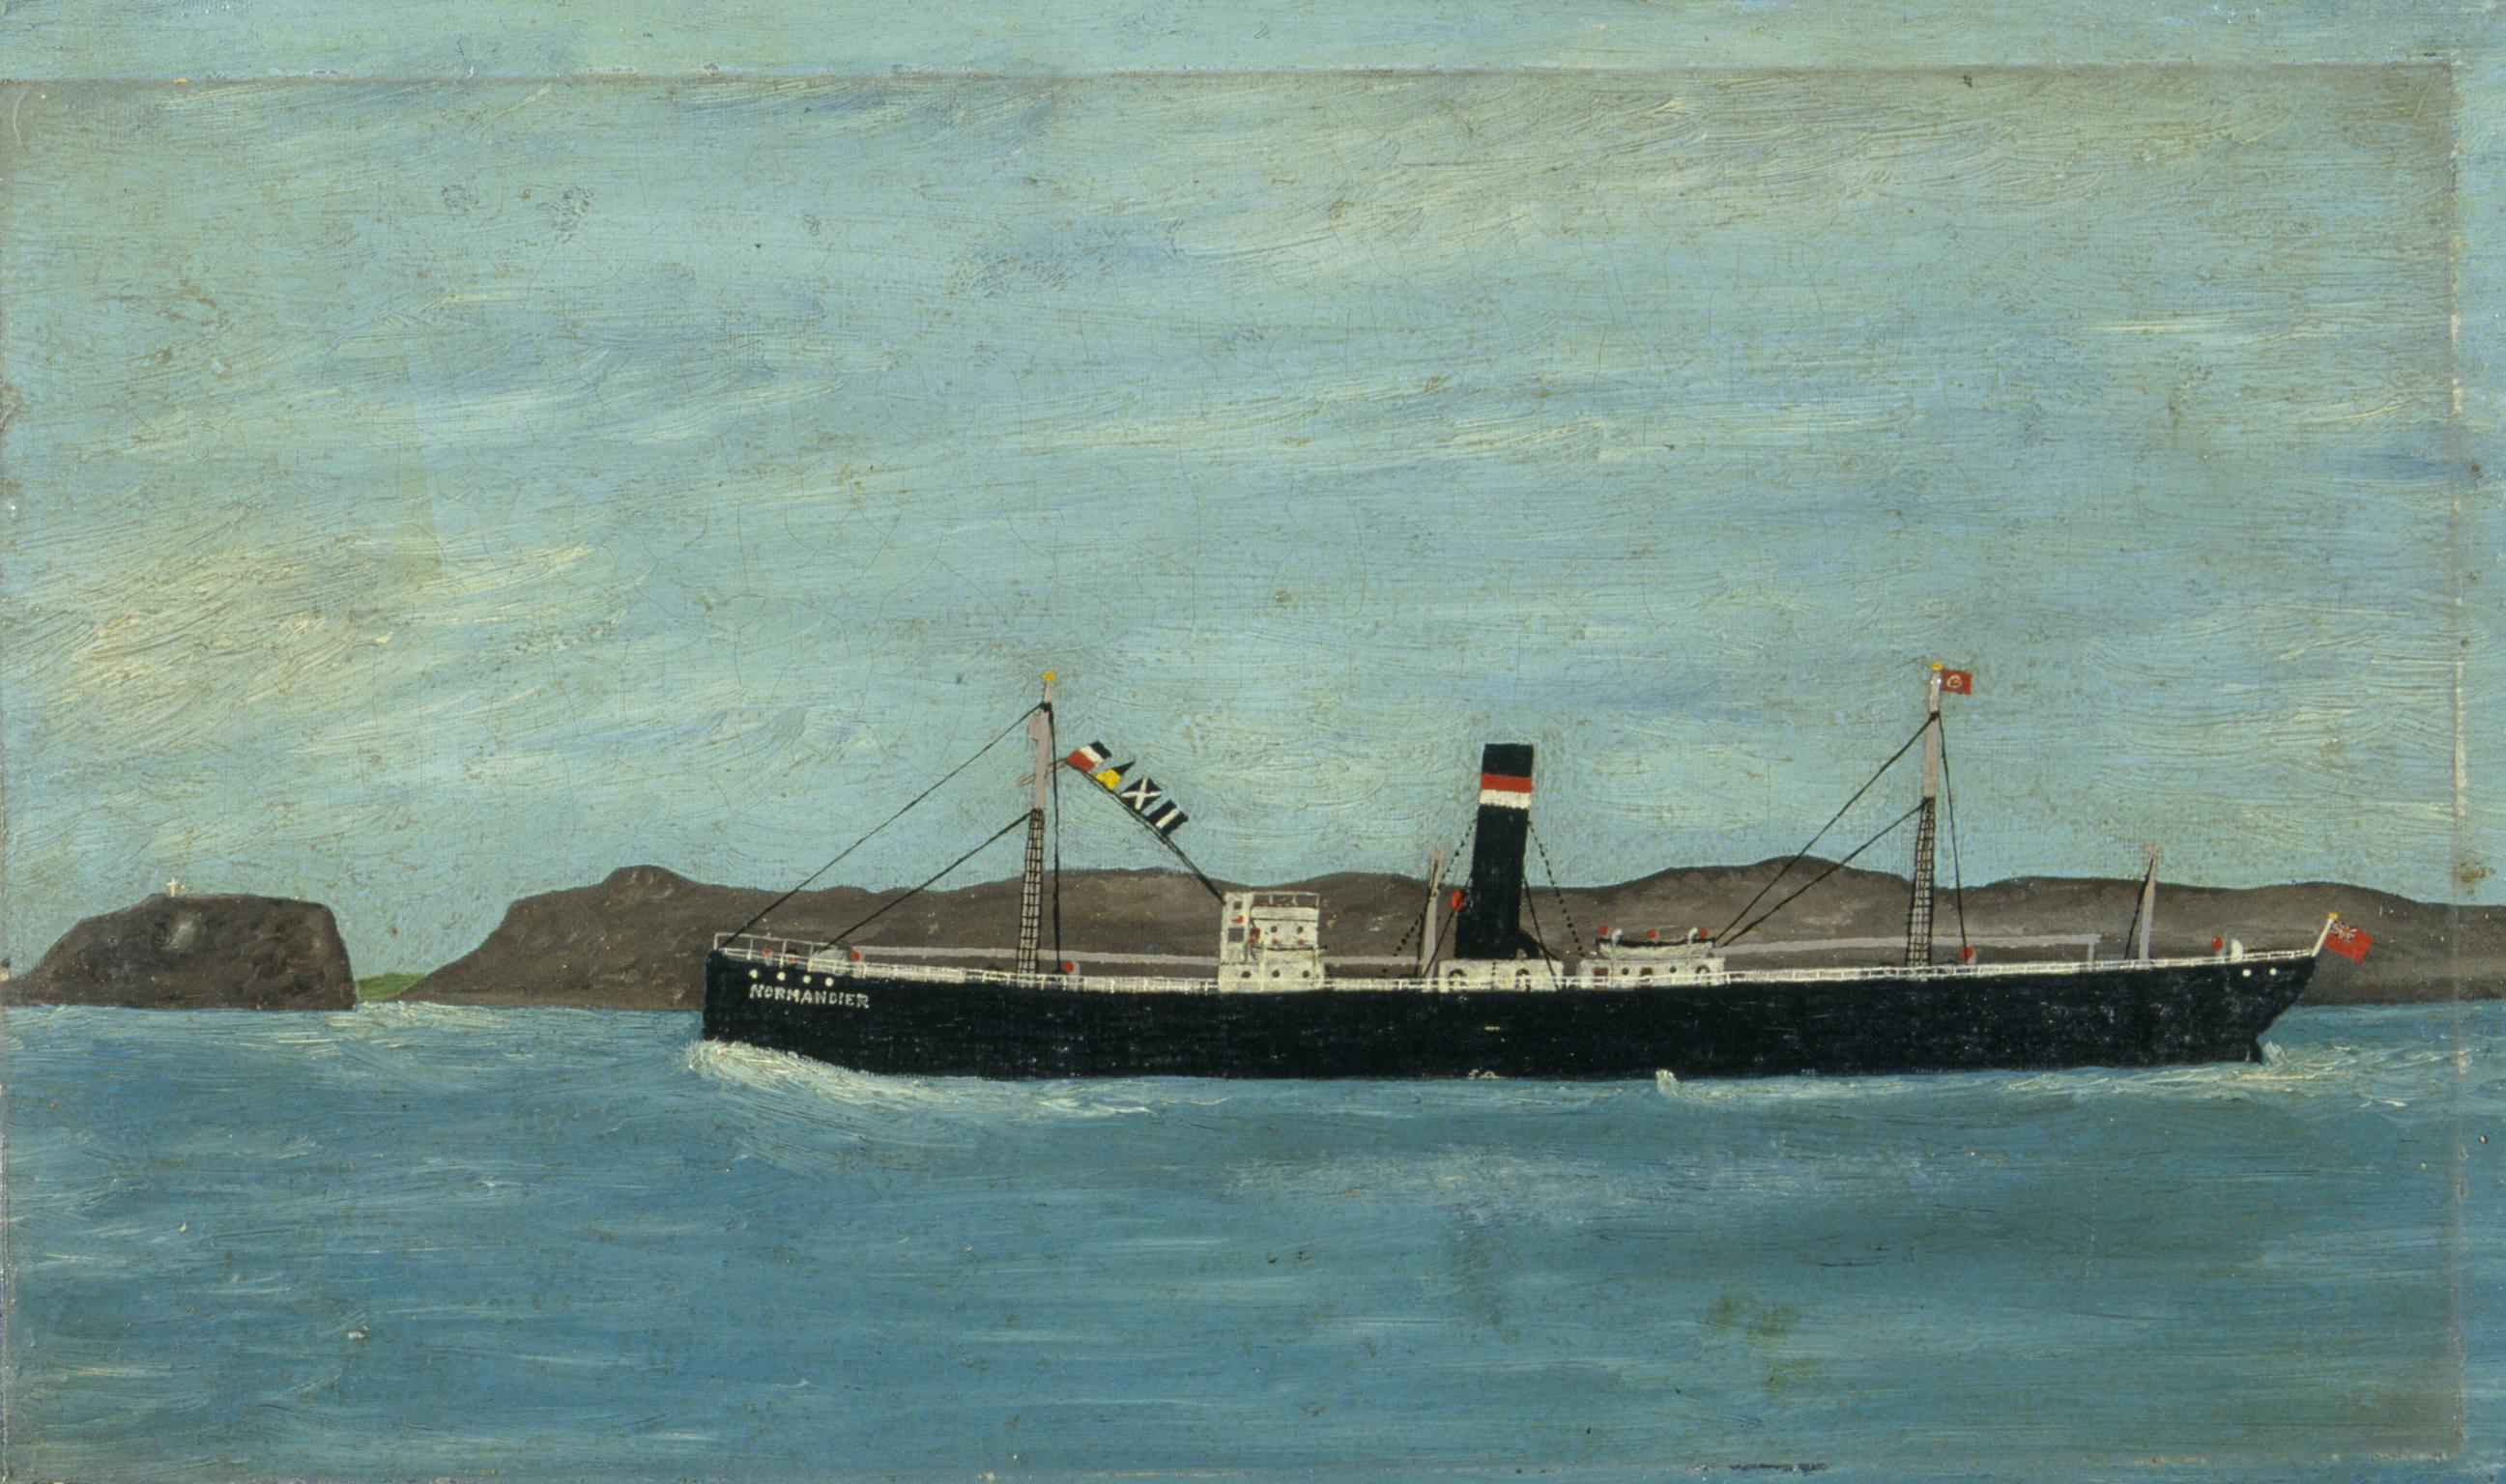 S.S. NORMANDIER (painting)